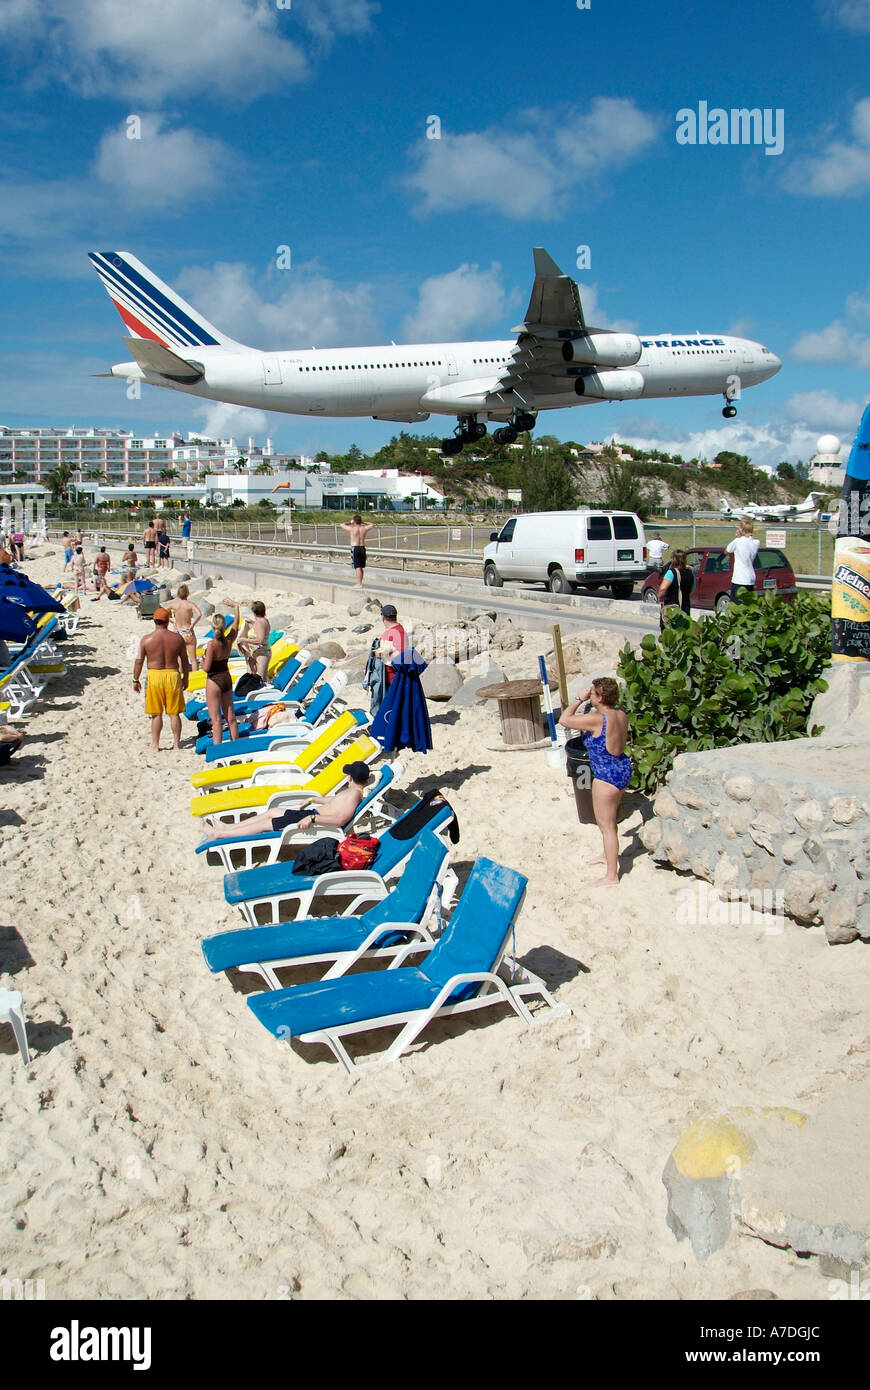 Air planes land at runway which ends at the Sun Beach on the Caribbean Island of St Maarten Martin in the West Indies Stock Photo